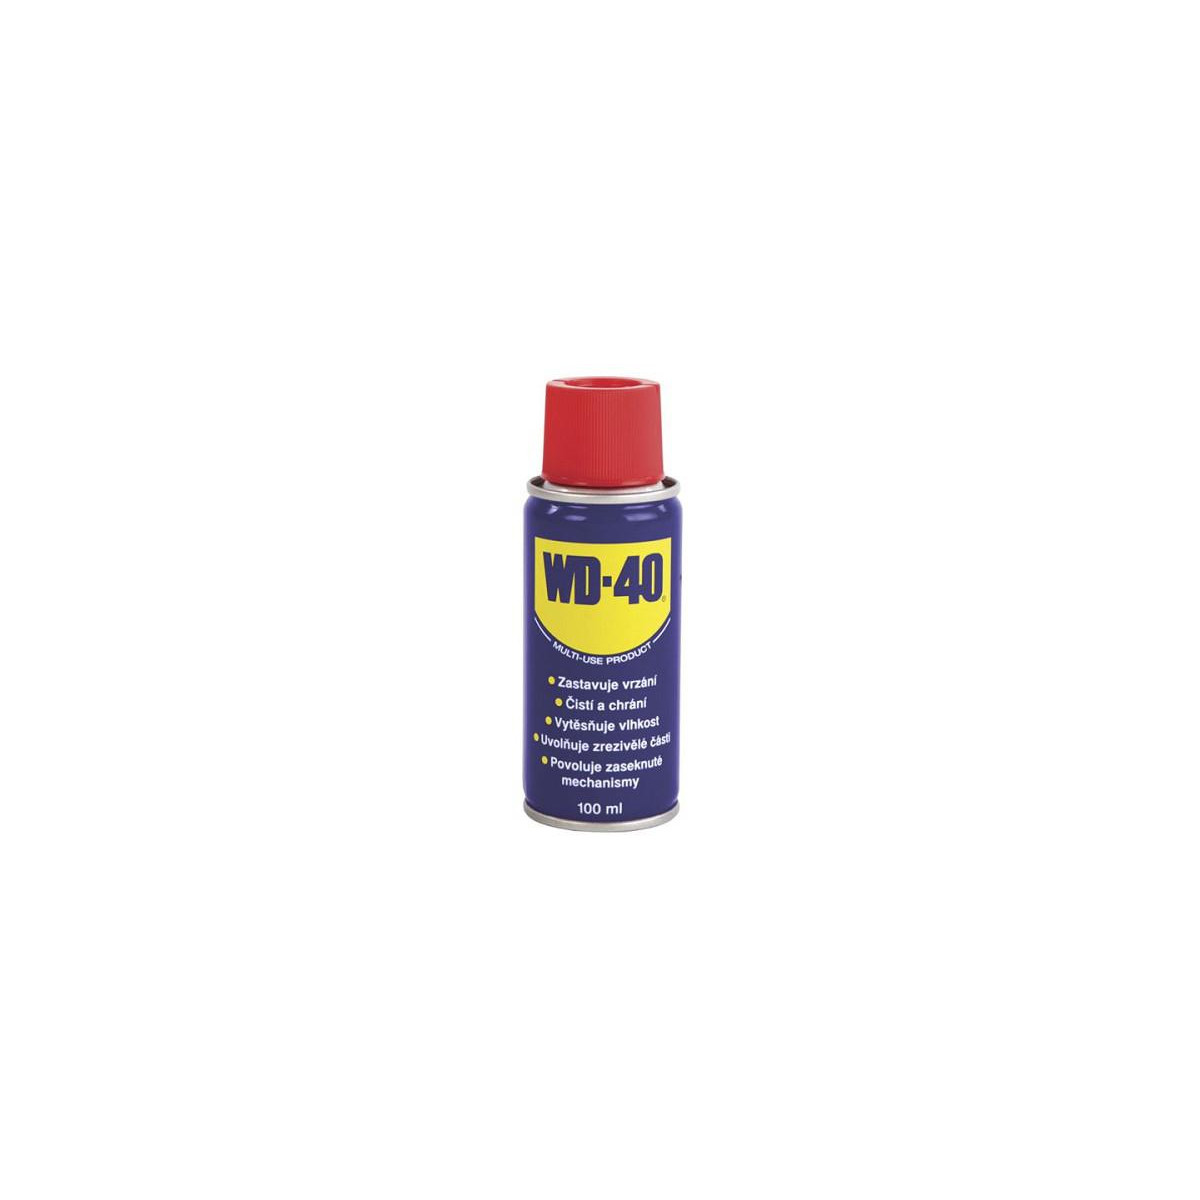 More about Mazivo WD-40 100ml